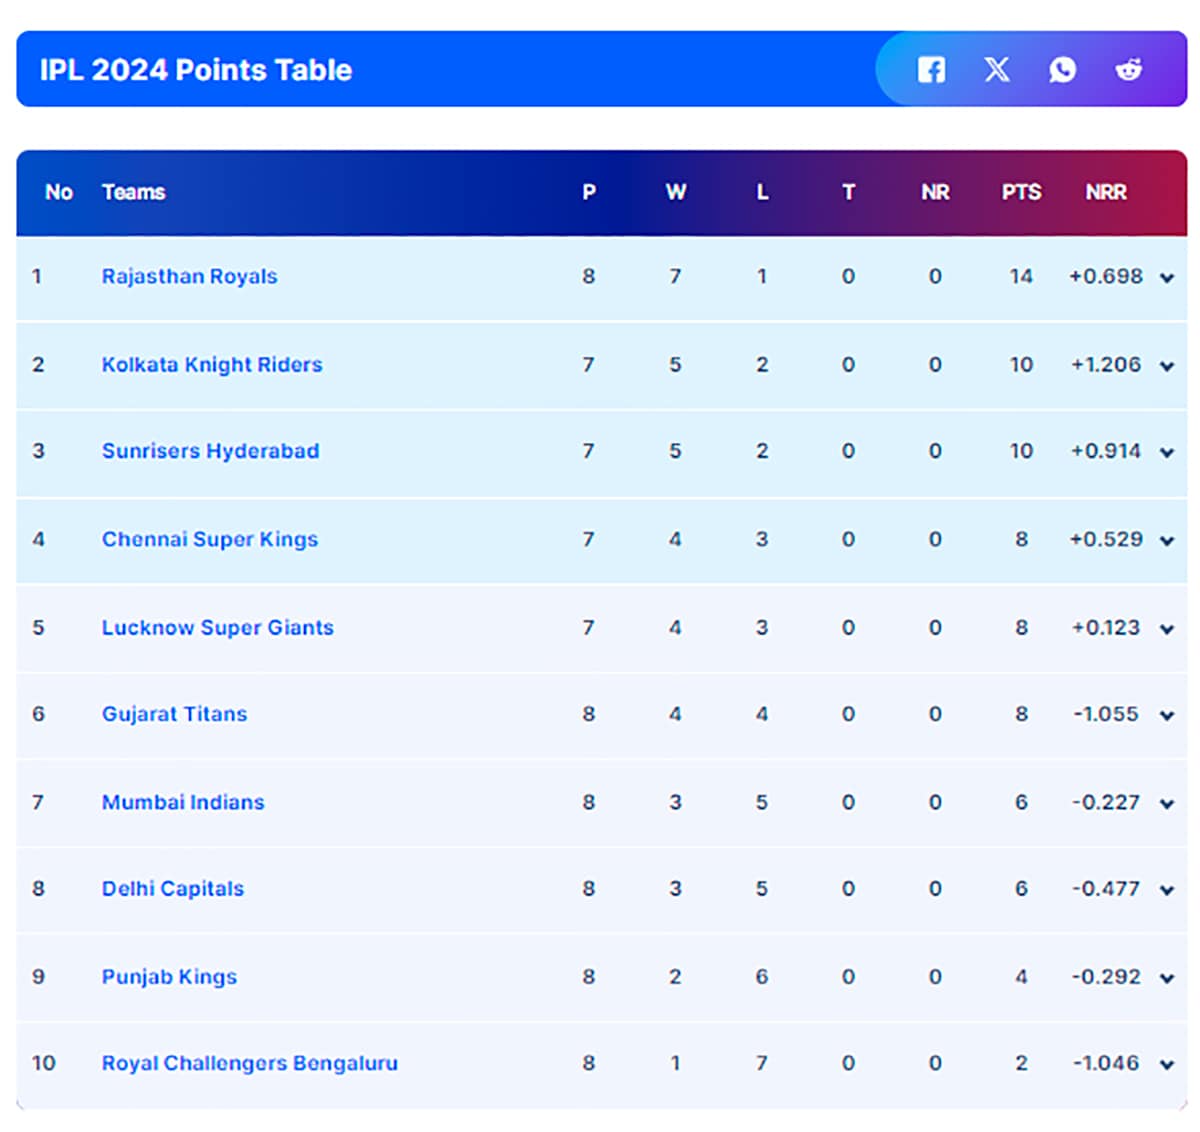 IPL 2024 Points Table: What Big Loss vs Rajasthan Royals Means For Mumbai Indians’ Playoff Hopes?